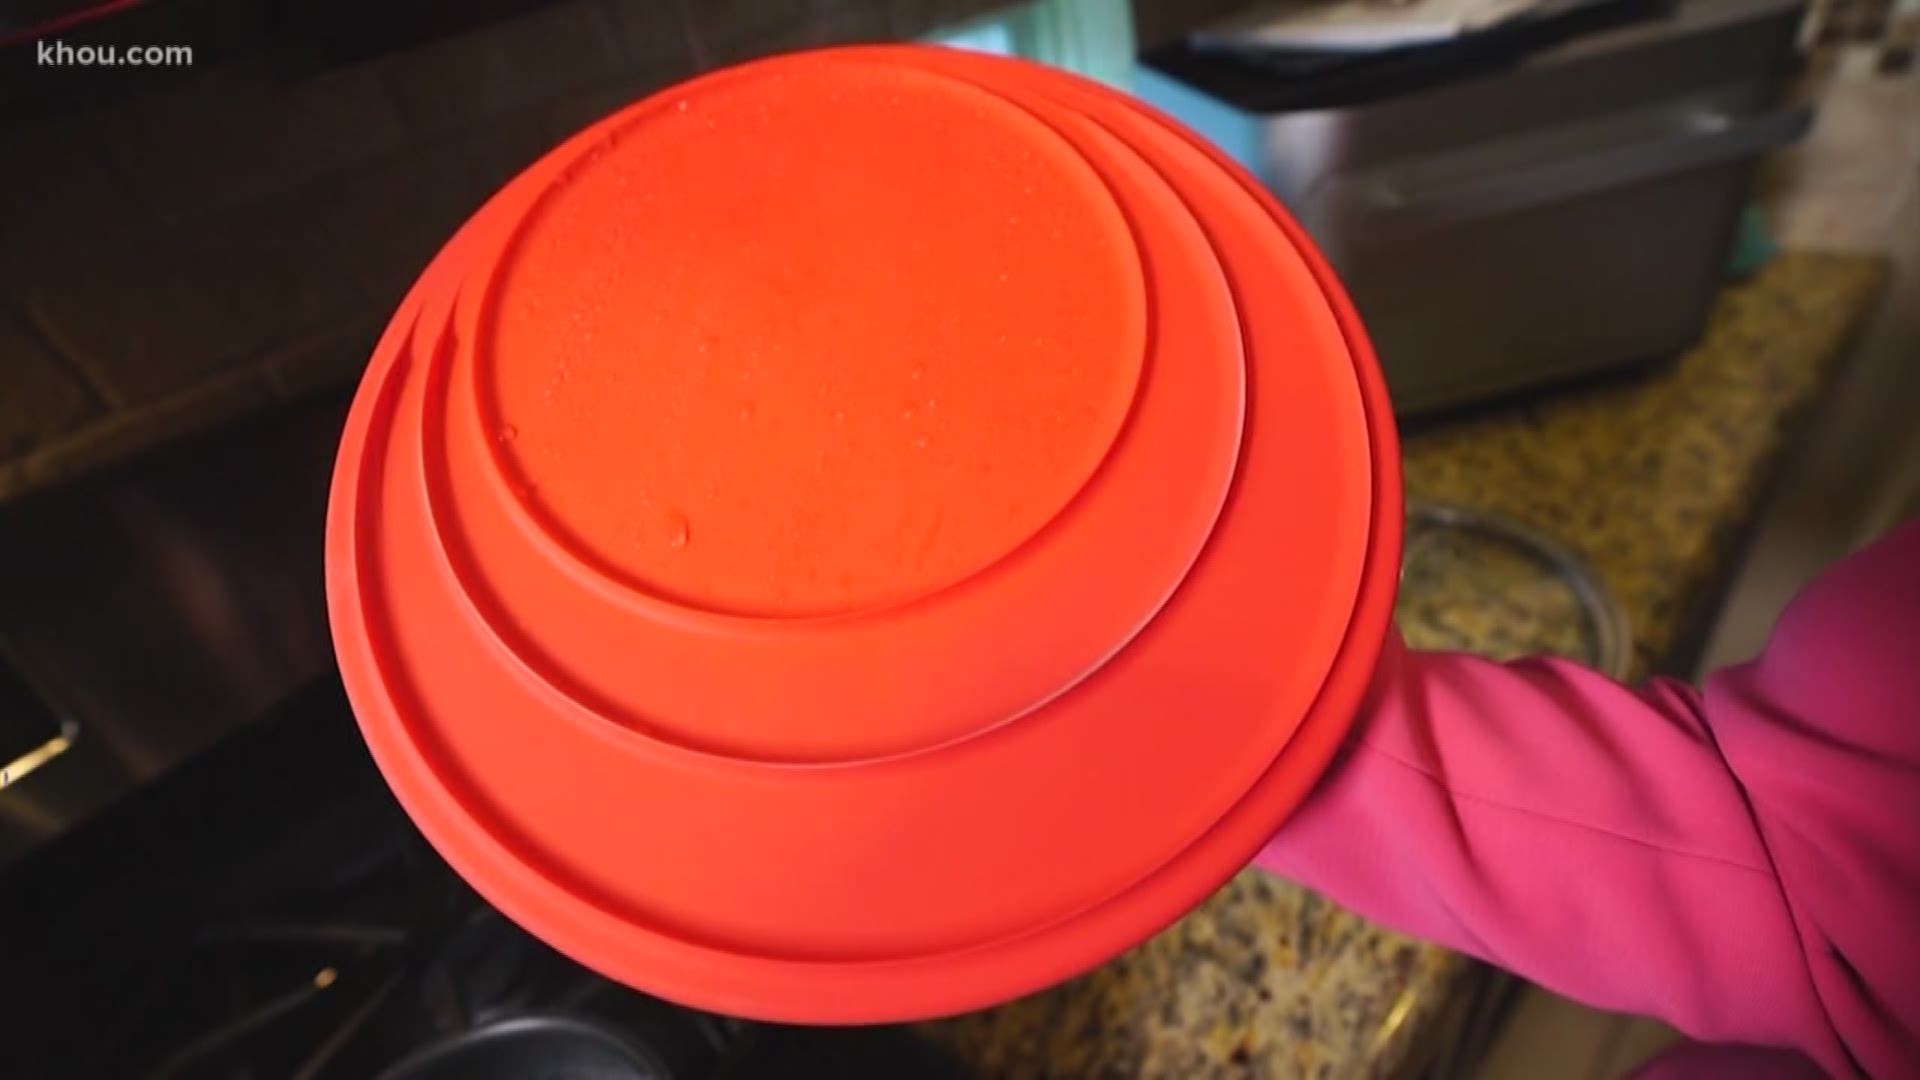 Time Magazine named the Made In Universal Lid as one of 2018's 50 best inventions. We bought one to see what the fuss was all about.